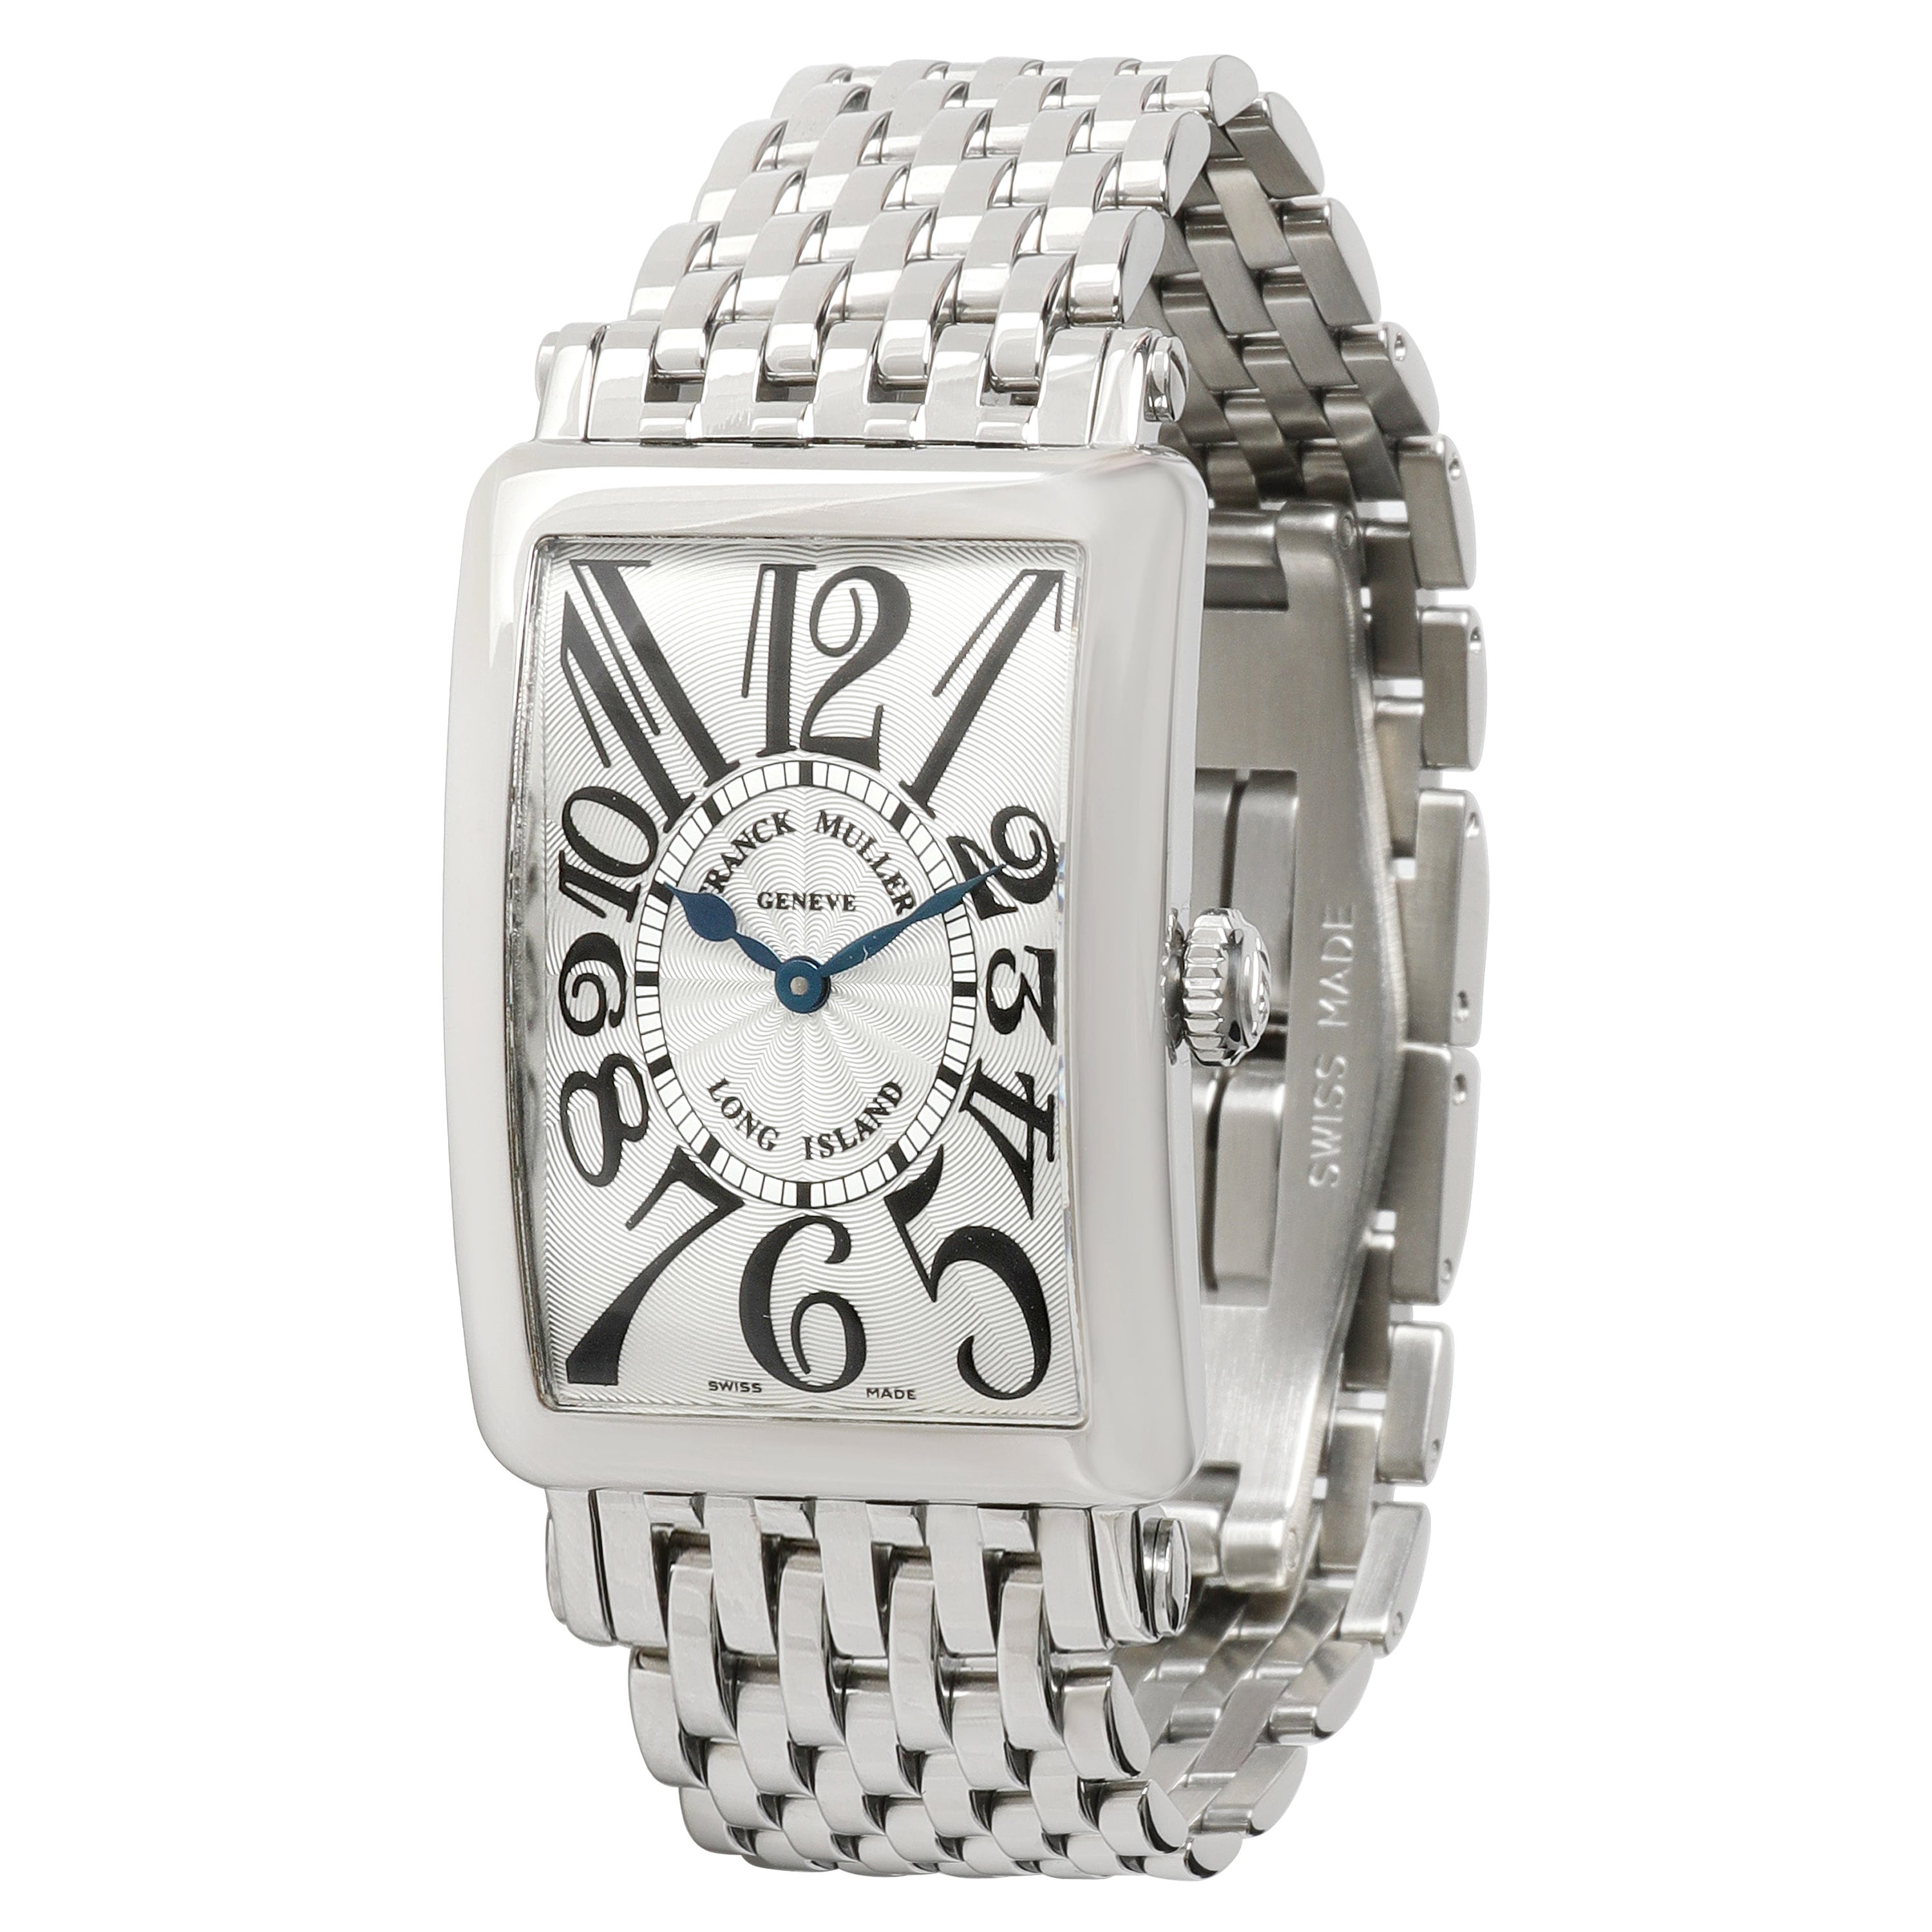 Franck Muller Long Island 952 QZ Unisex Watch in Stainless Steel